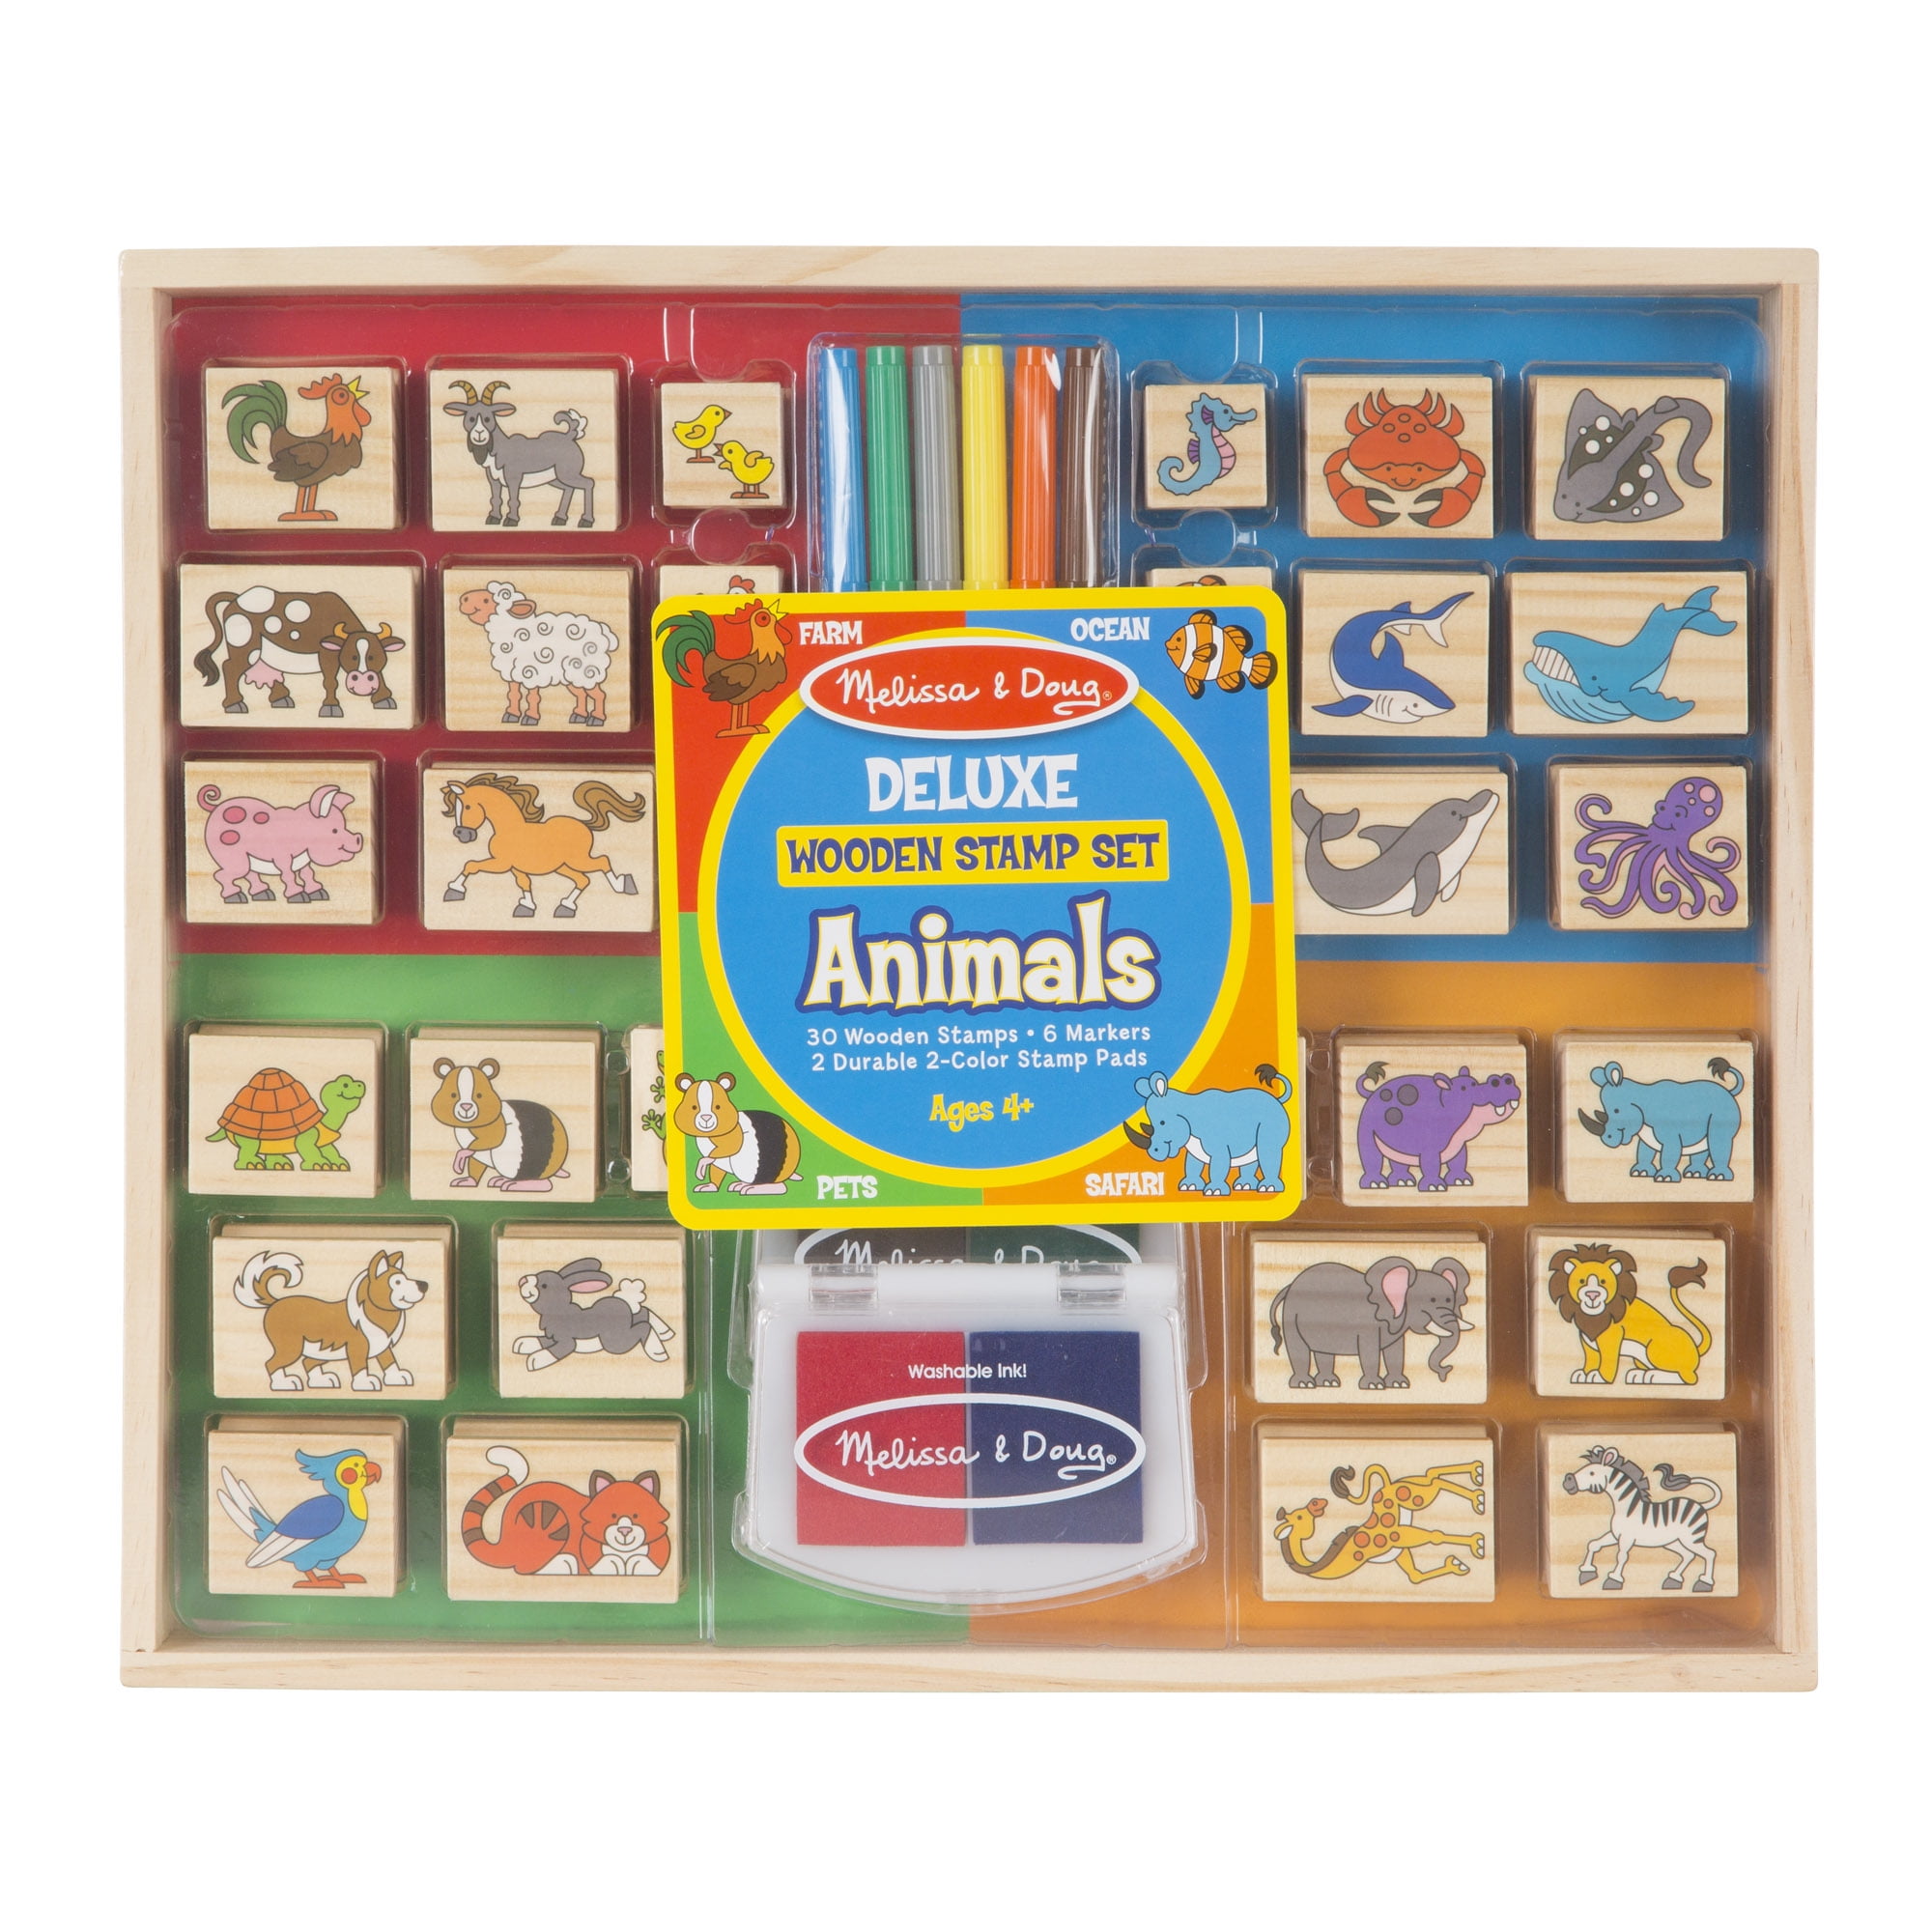 Melissa & Doug Happy Handles Wooden Stamp Set 6 Stamps and 6-Color Stamp Pad 